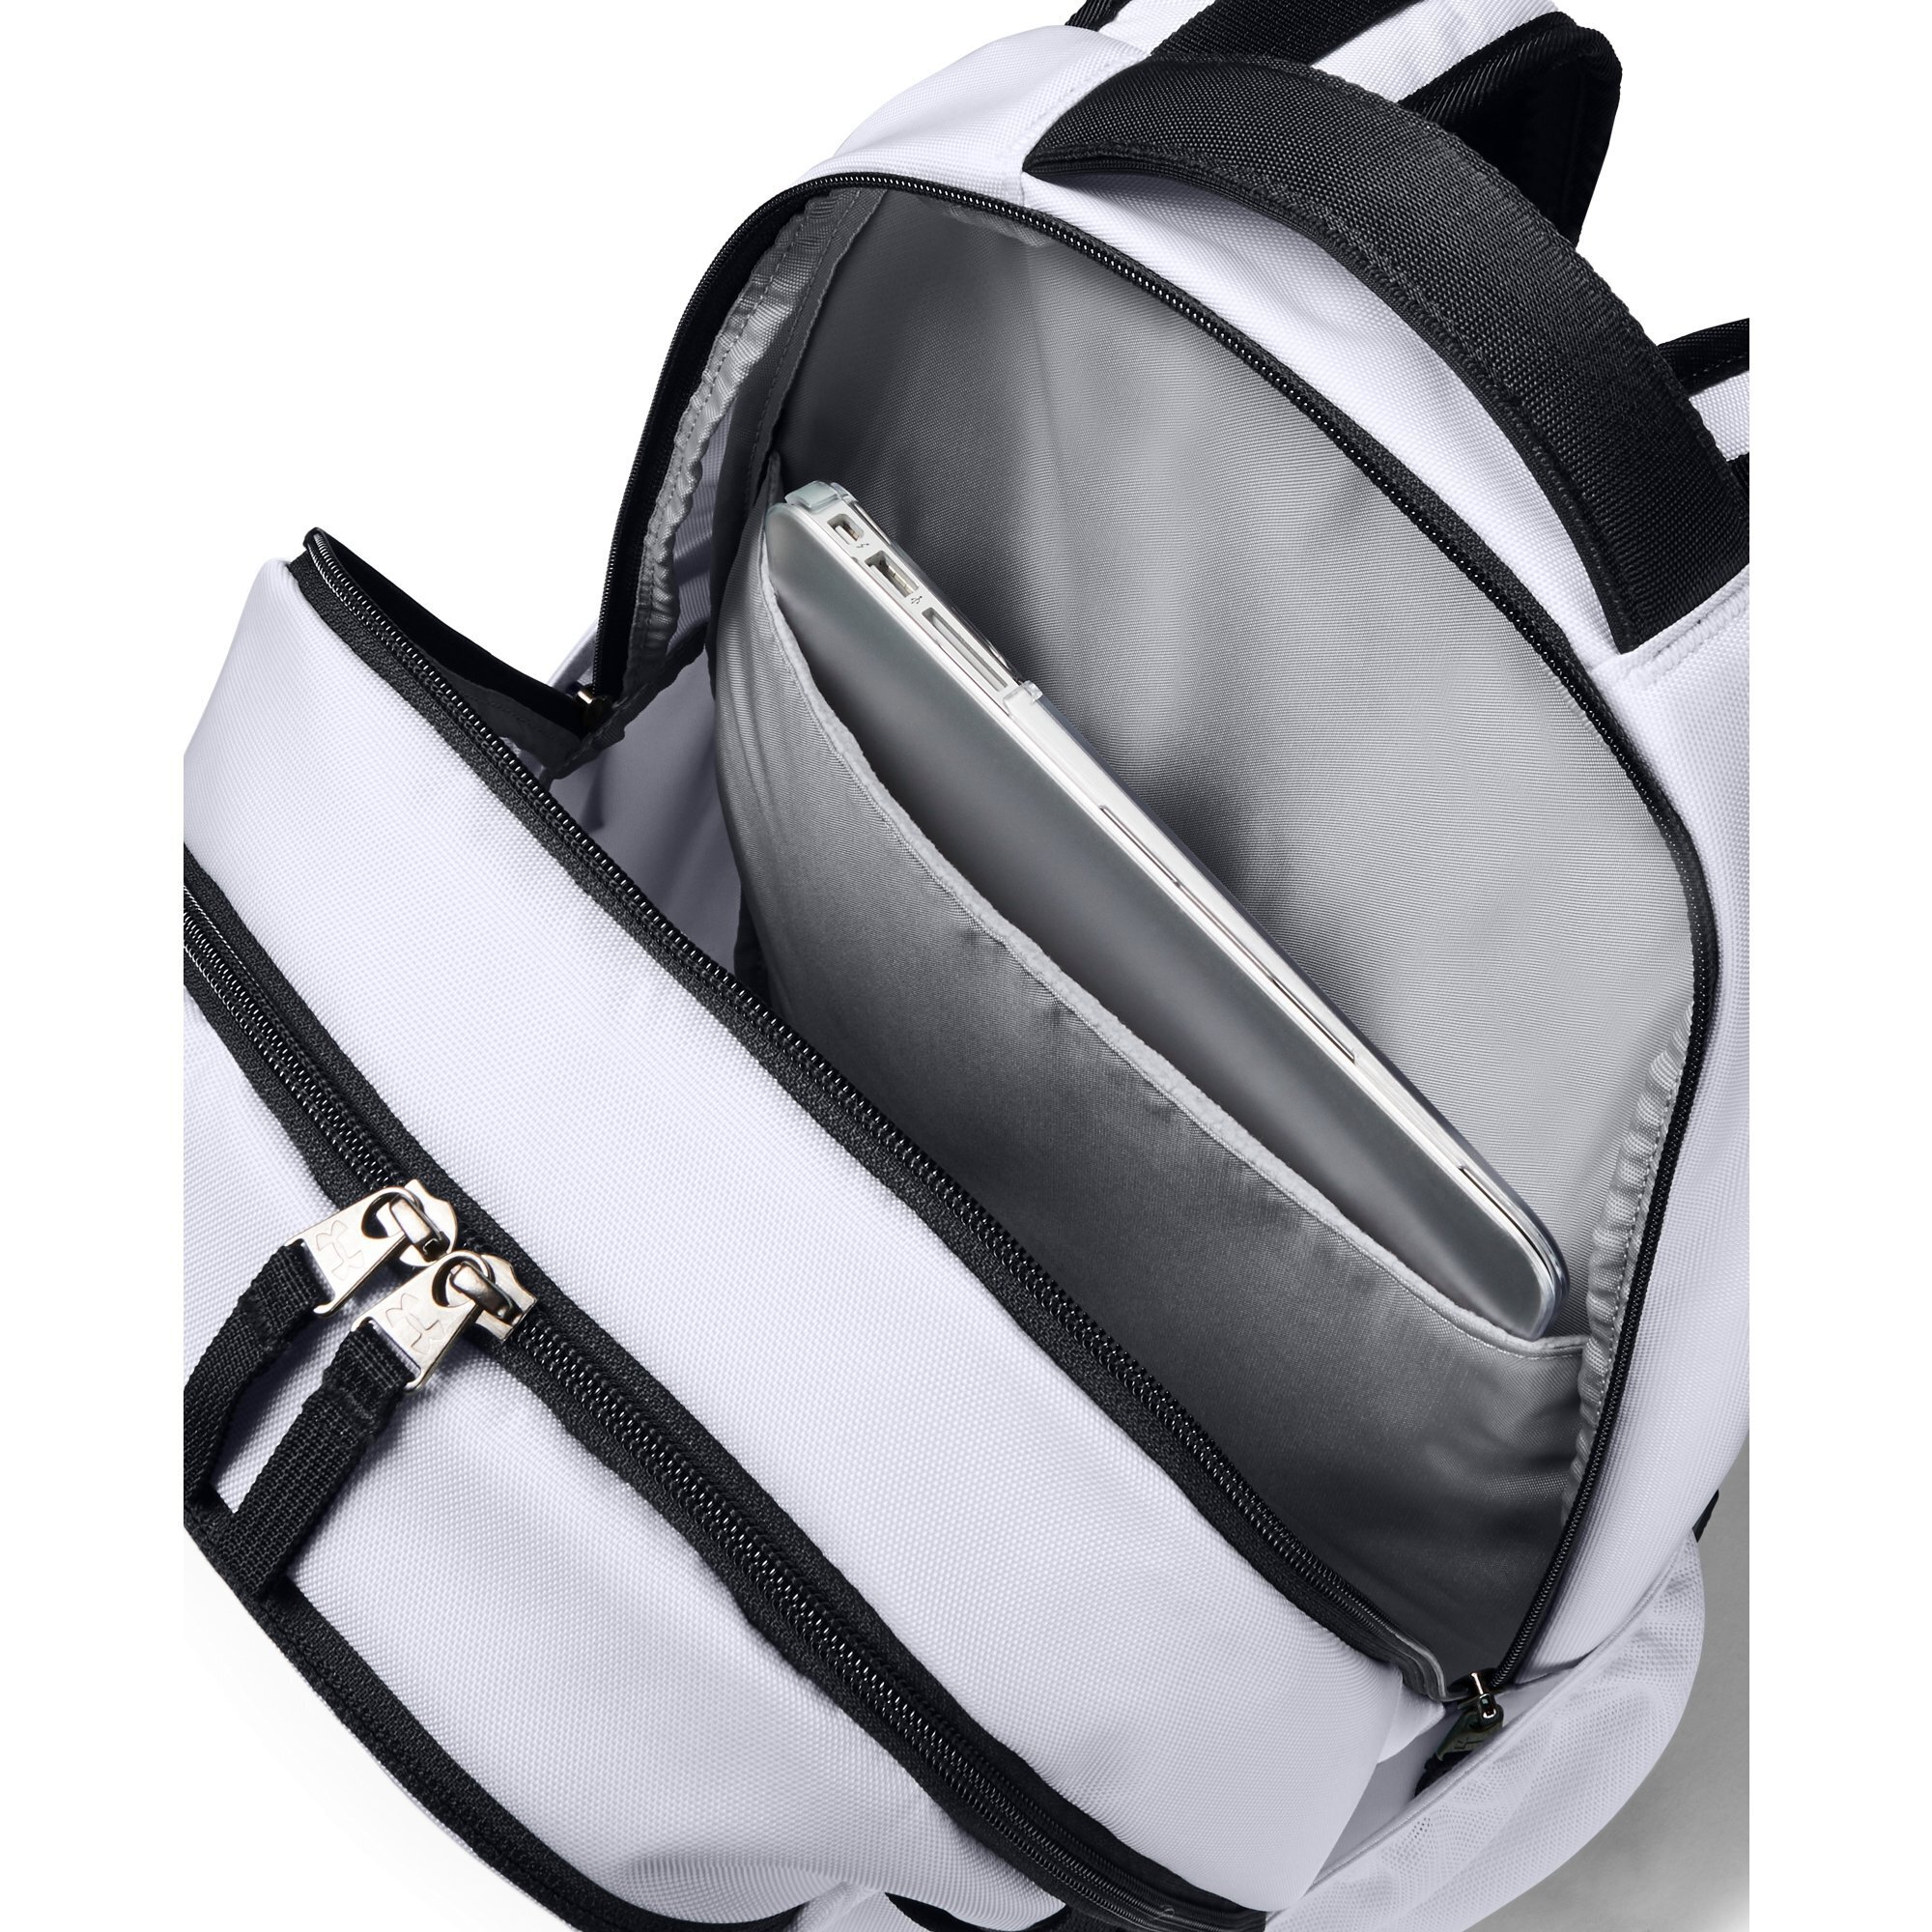 Under Armour Hustle Backpack, White - image 4 of 5